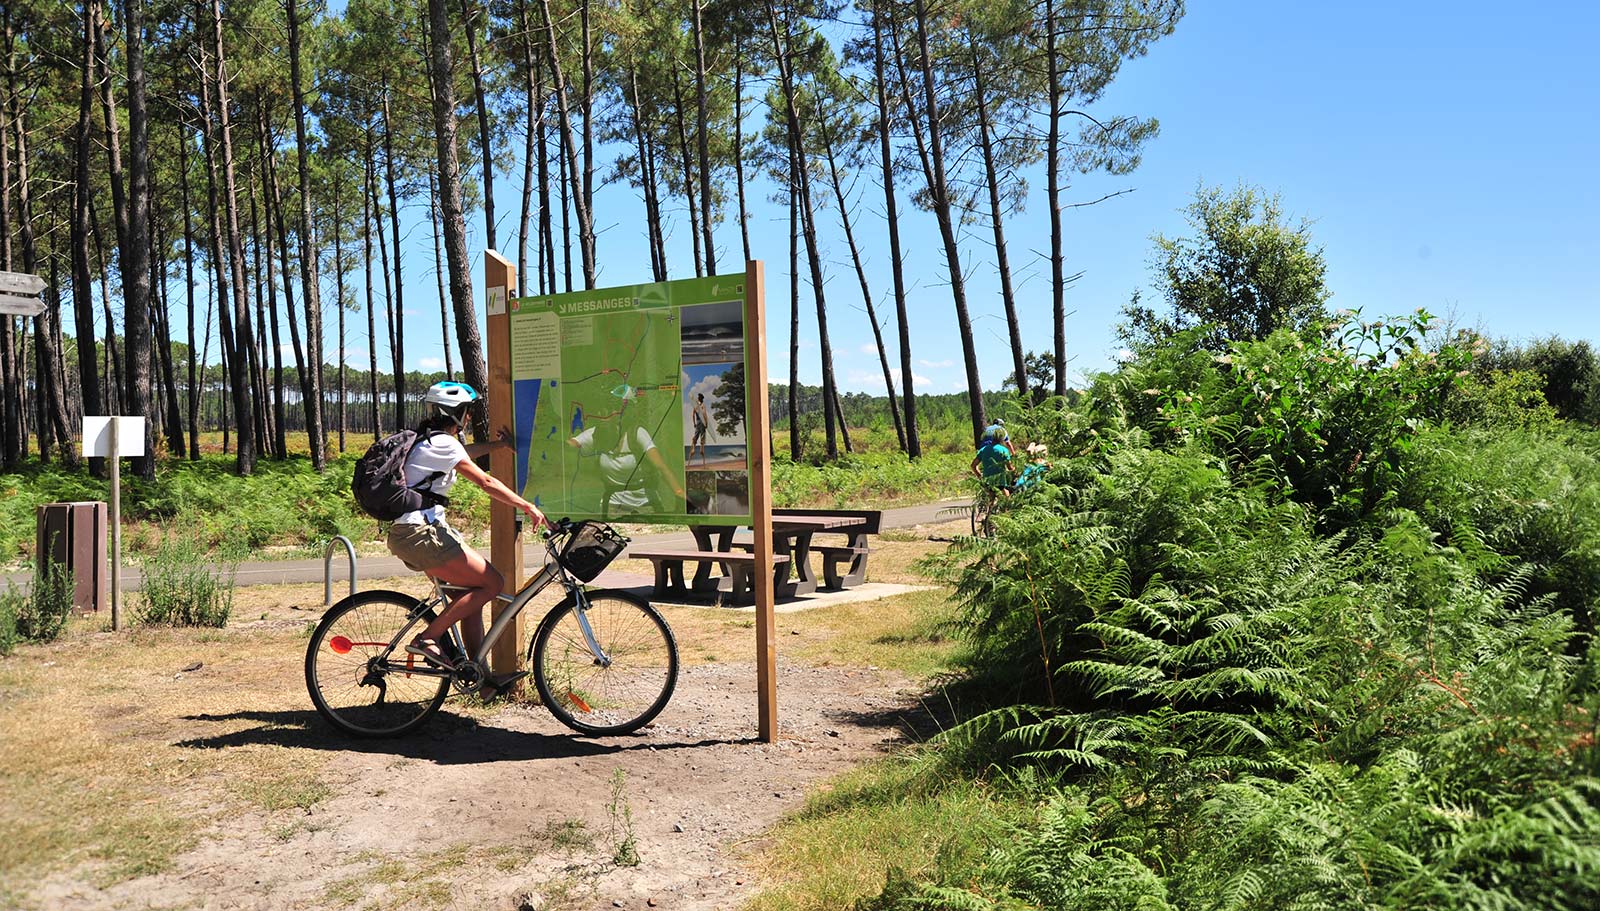 Entrance to a Vélodysée cycle path in the moors near the campsite